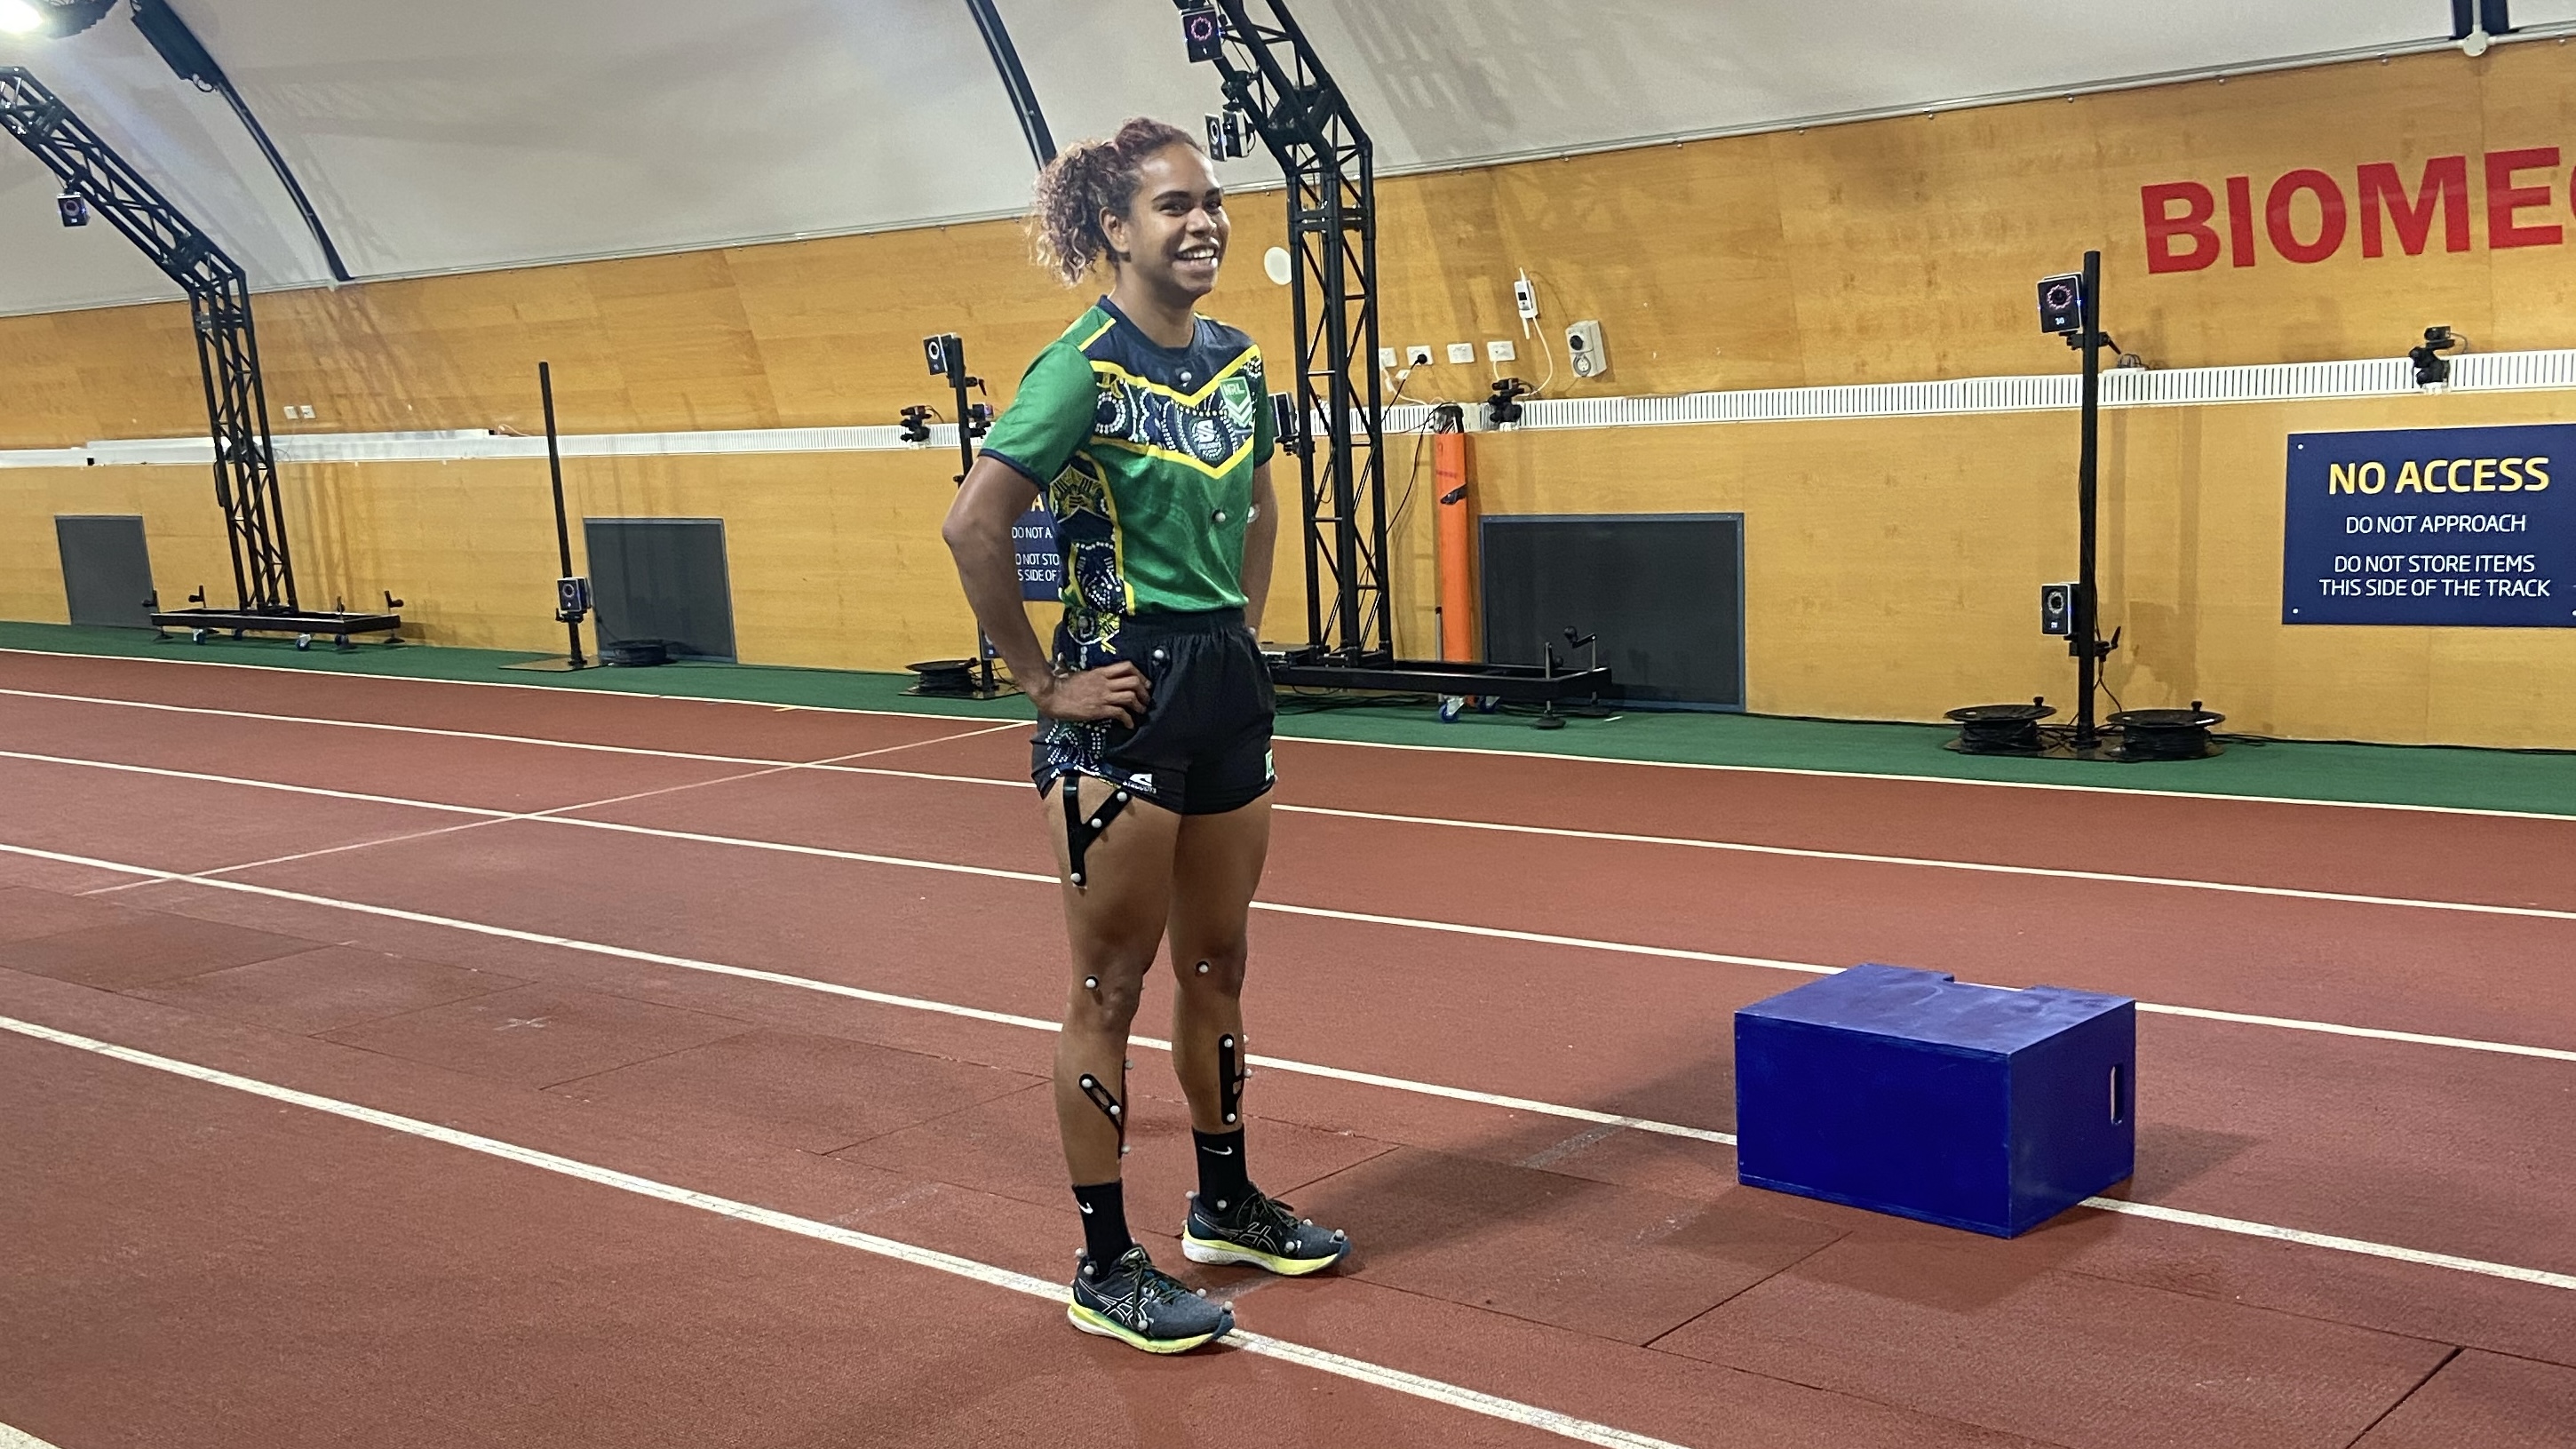 NRLW athlete stands inside in the AIS running lanes